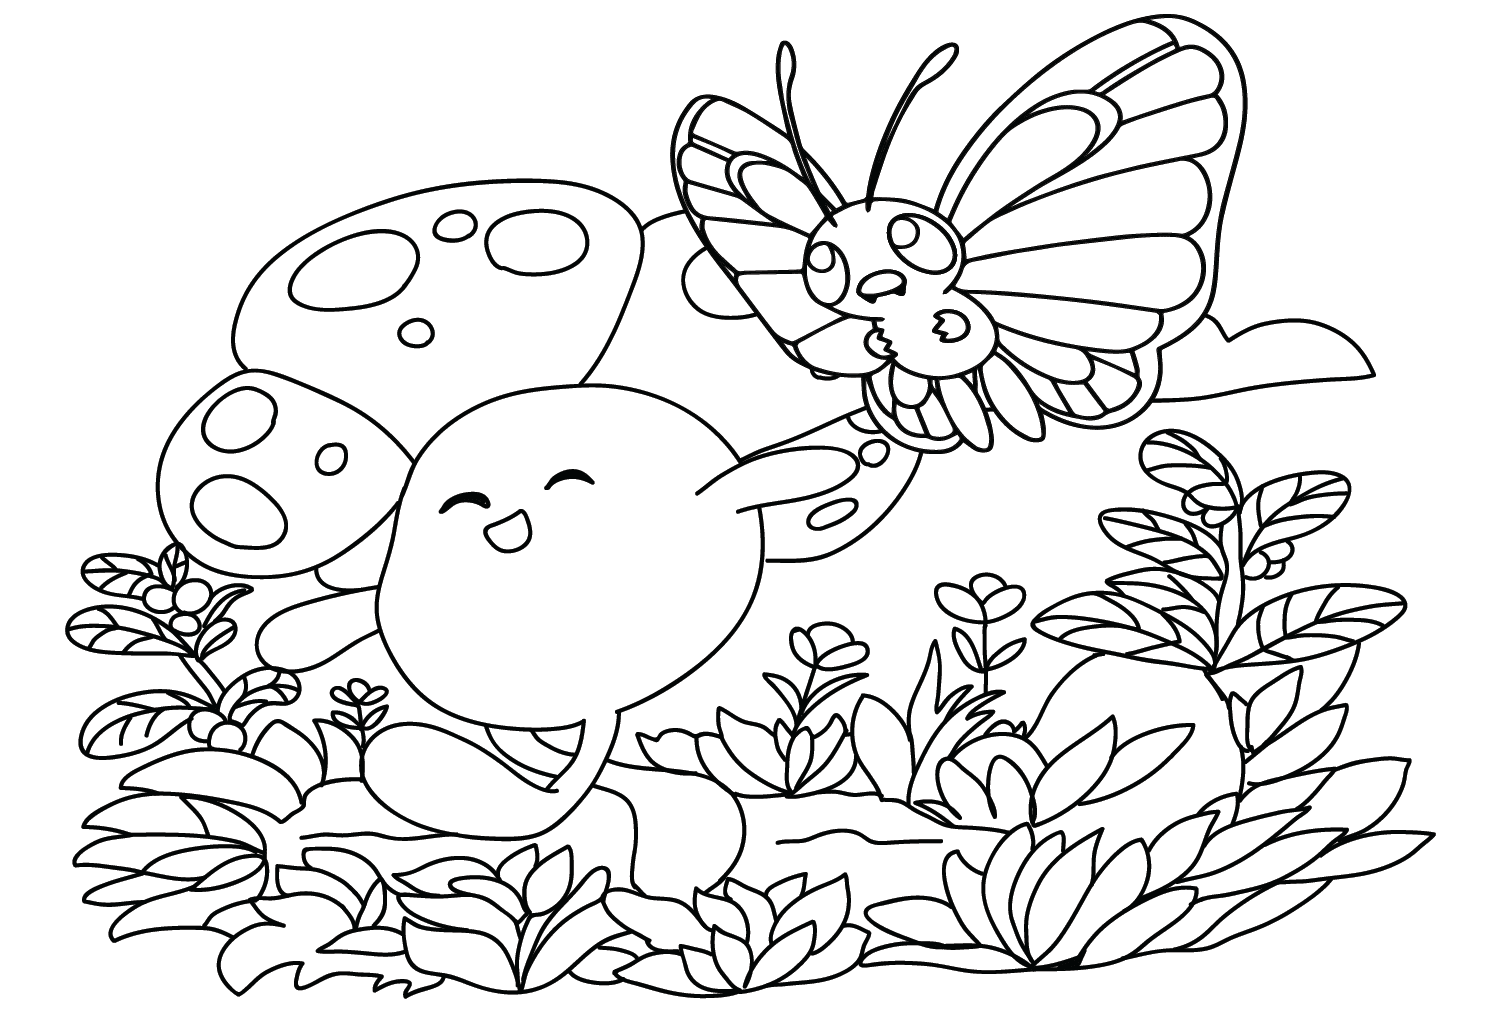 Vileplume and Butterfree Coloring Page from Butterfree